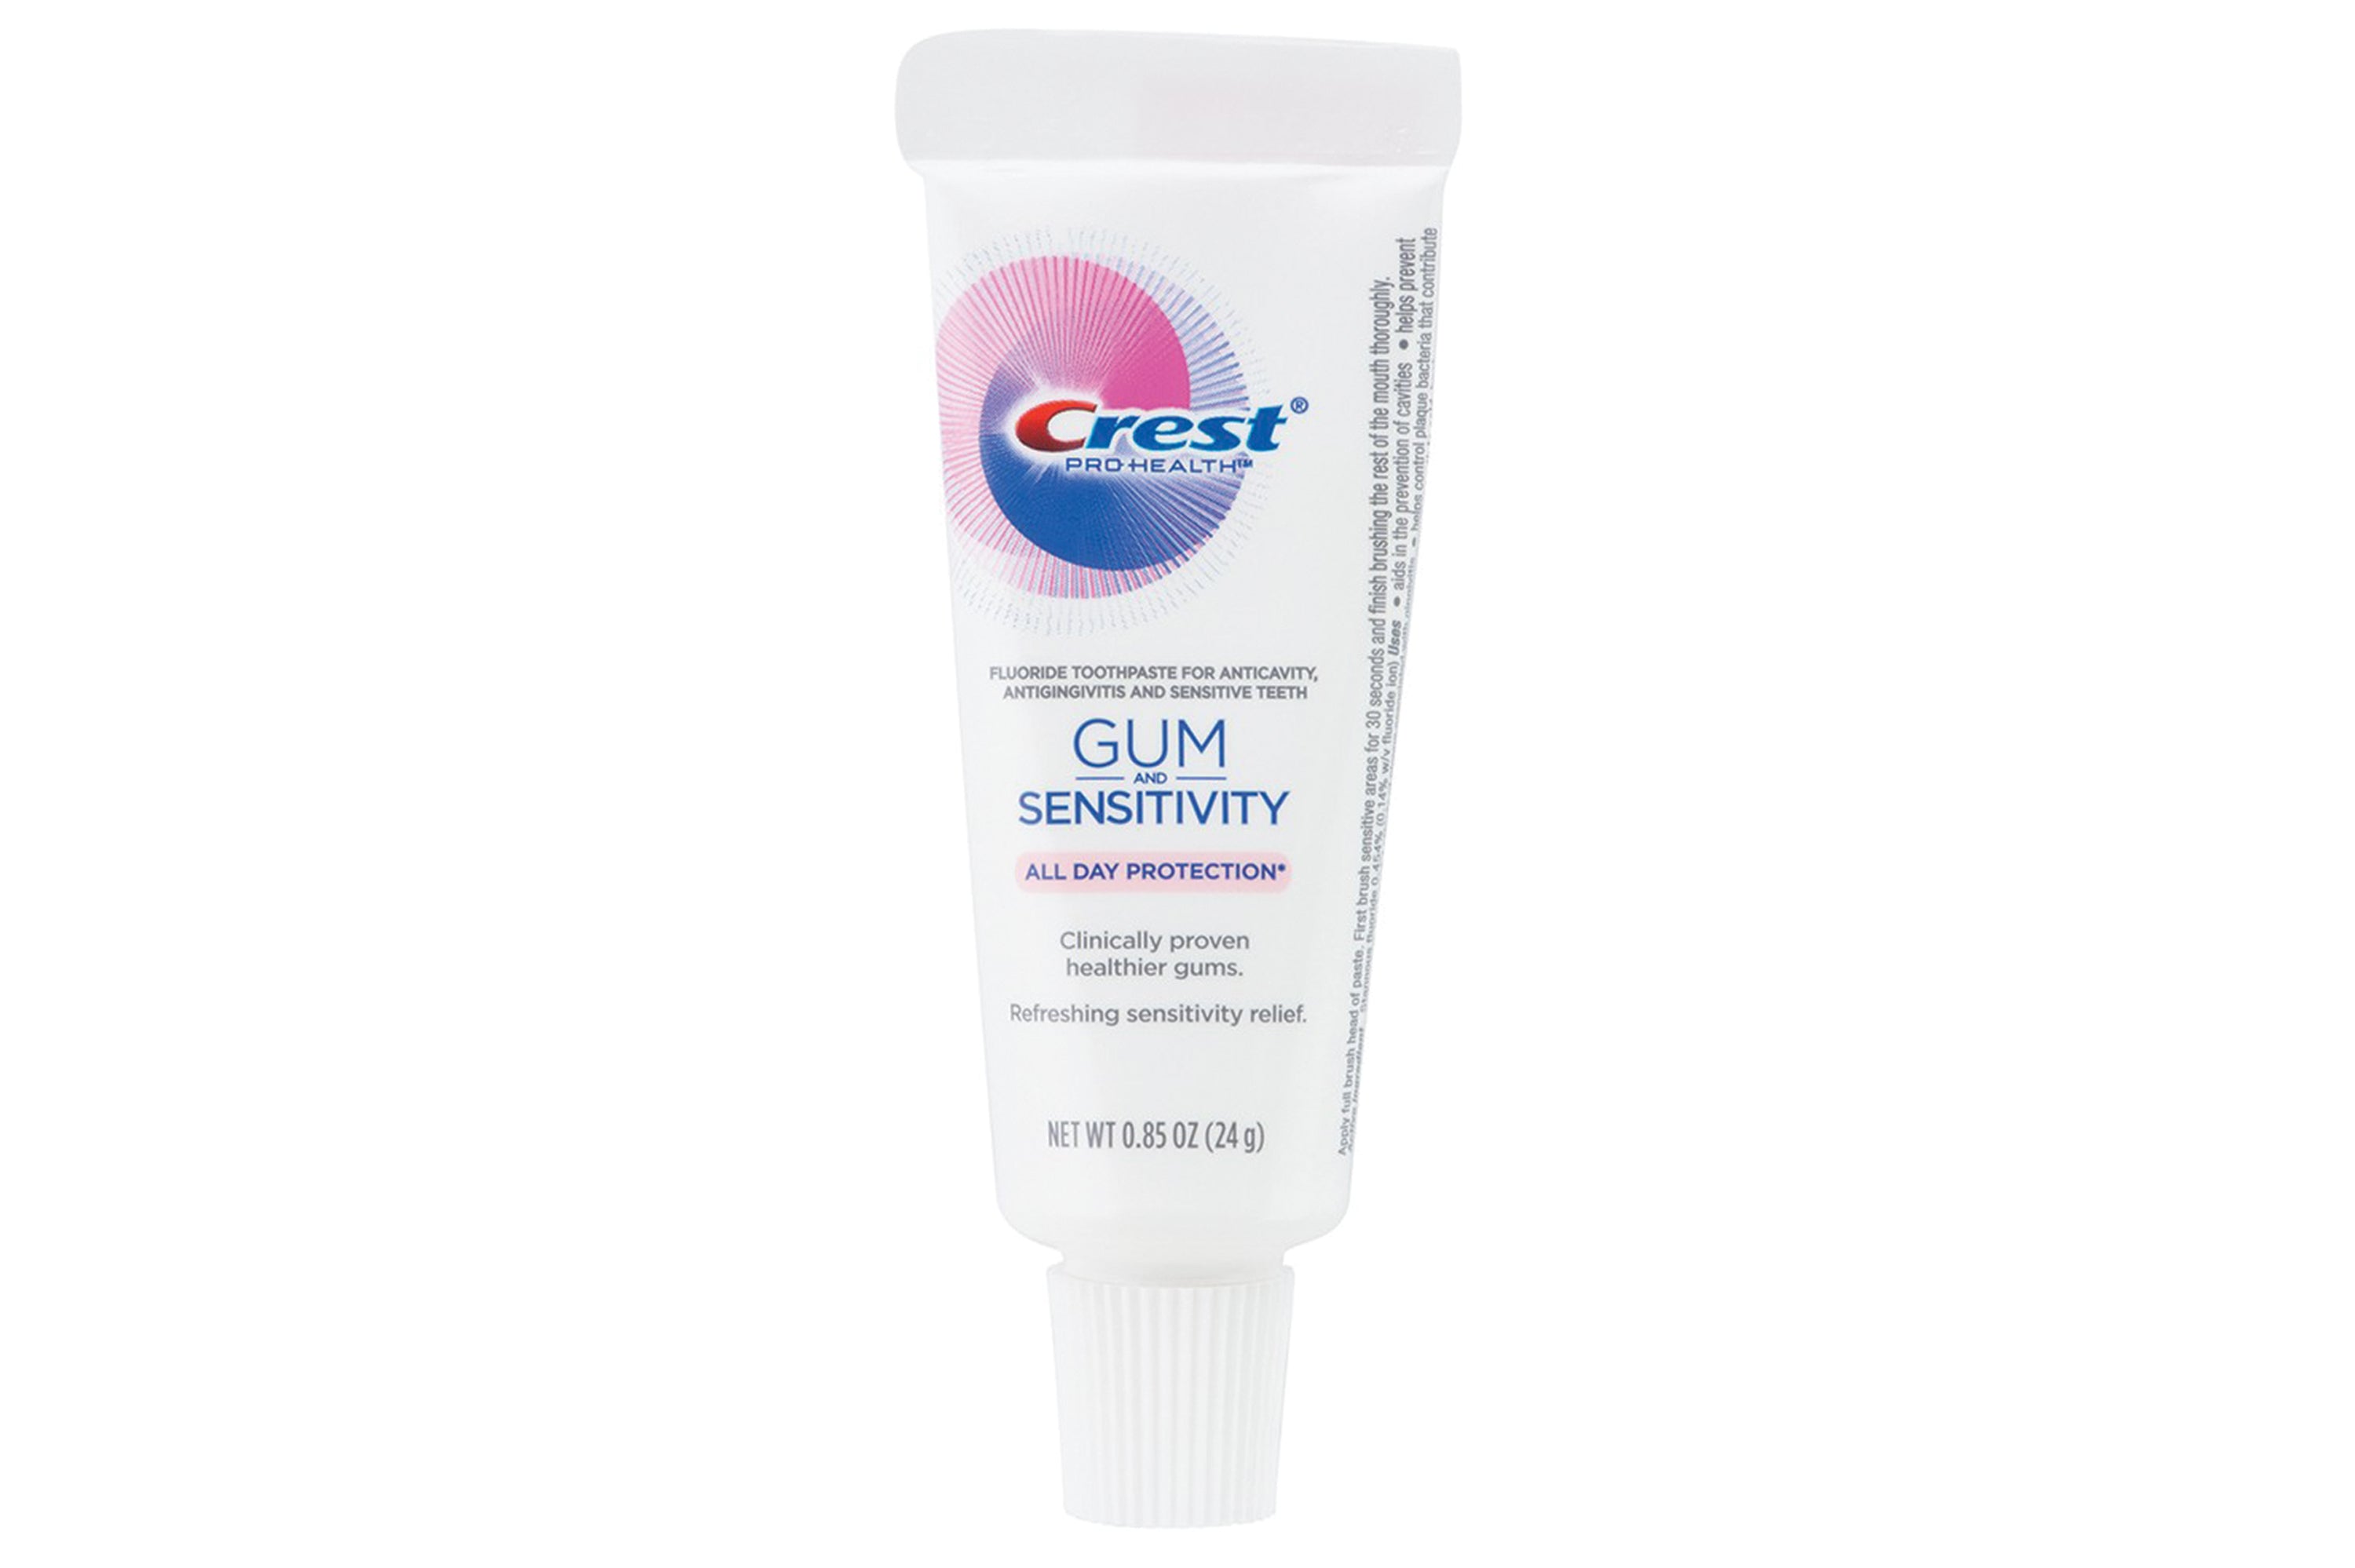 Crest Pro-Health Gum and Sensitivity Toothpaste – Top Quality Manufacturing